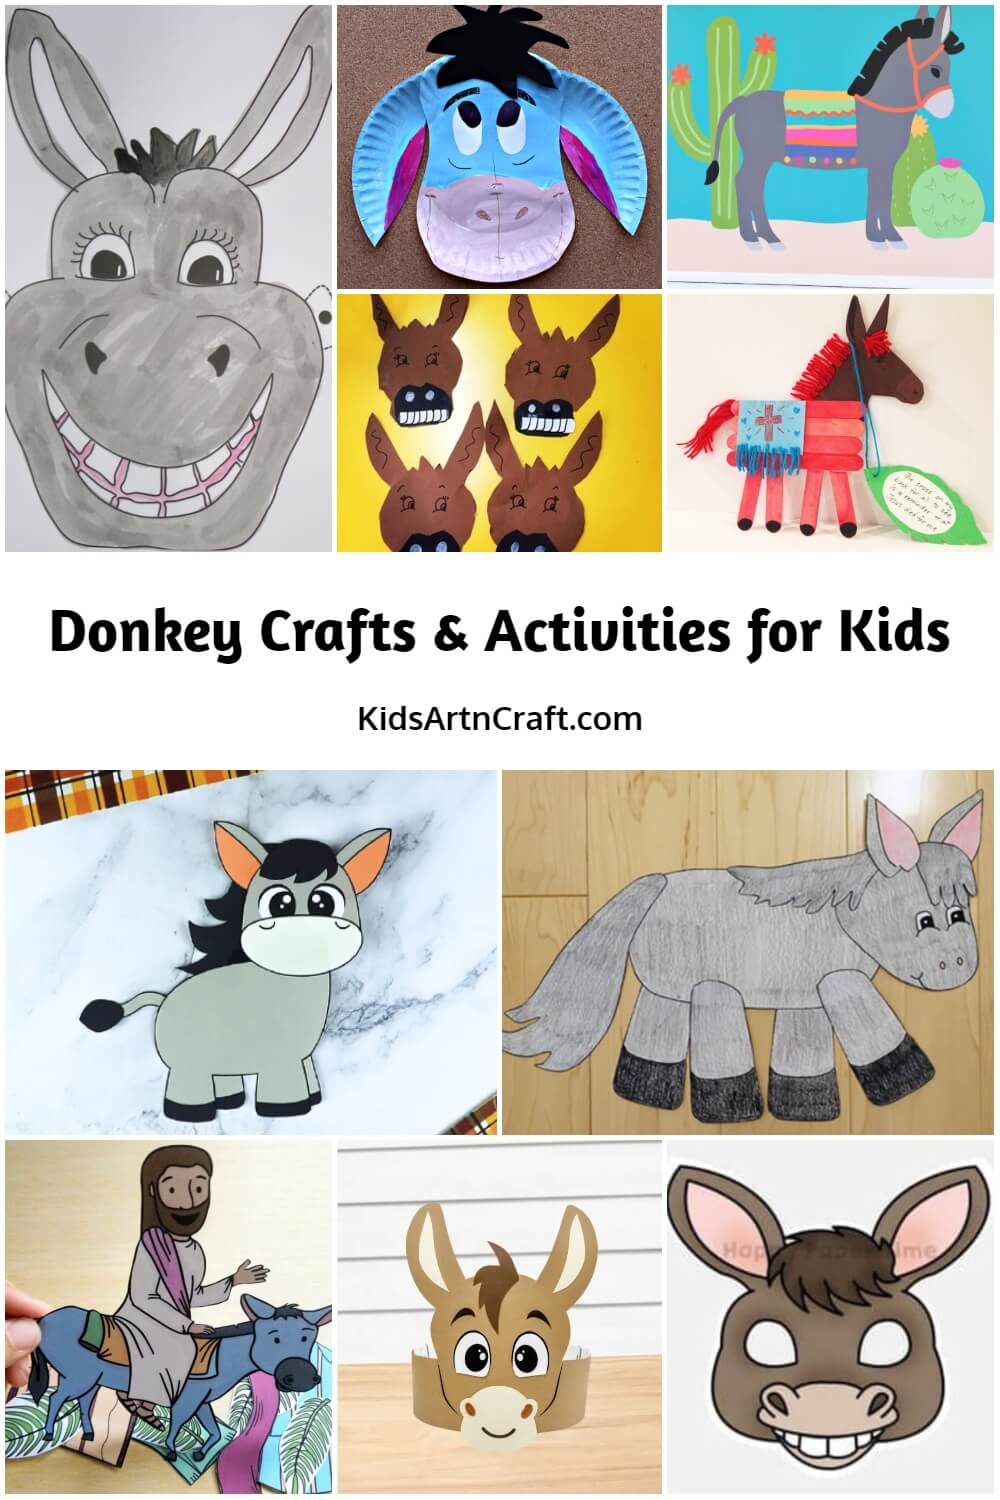 Donkey Crafts & Activities for Kids